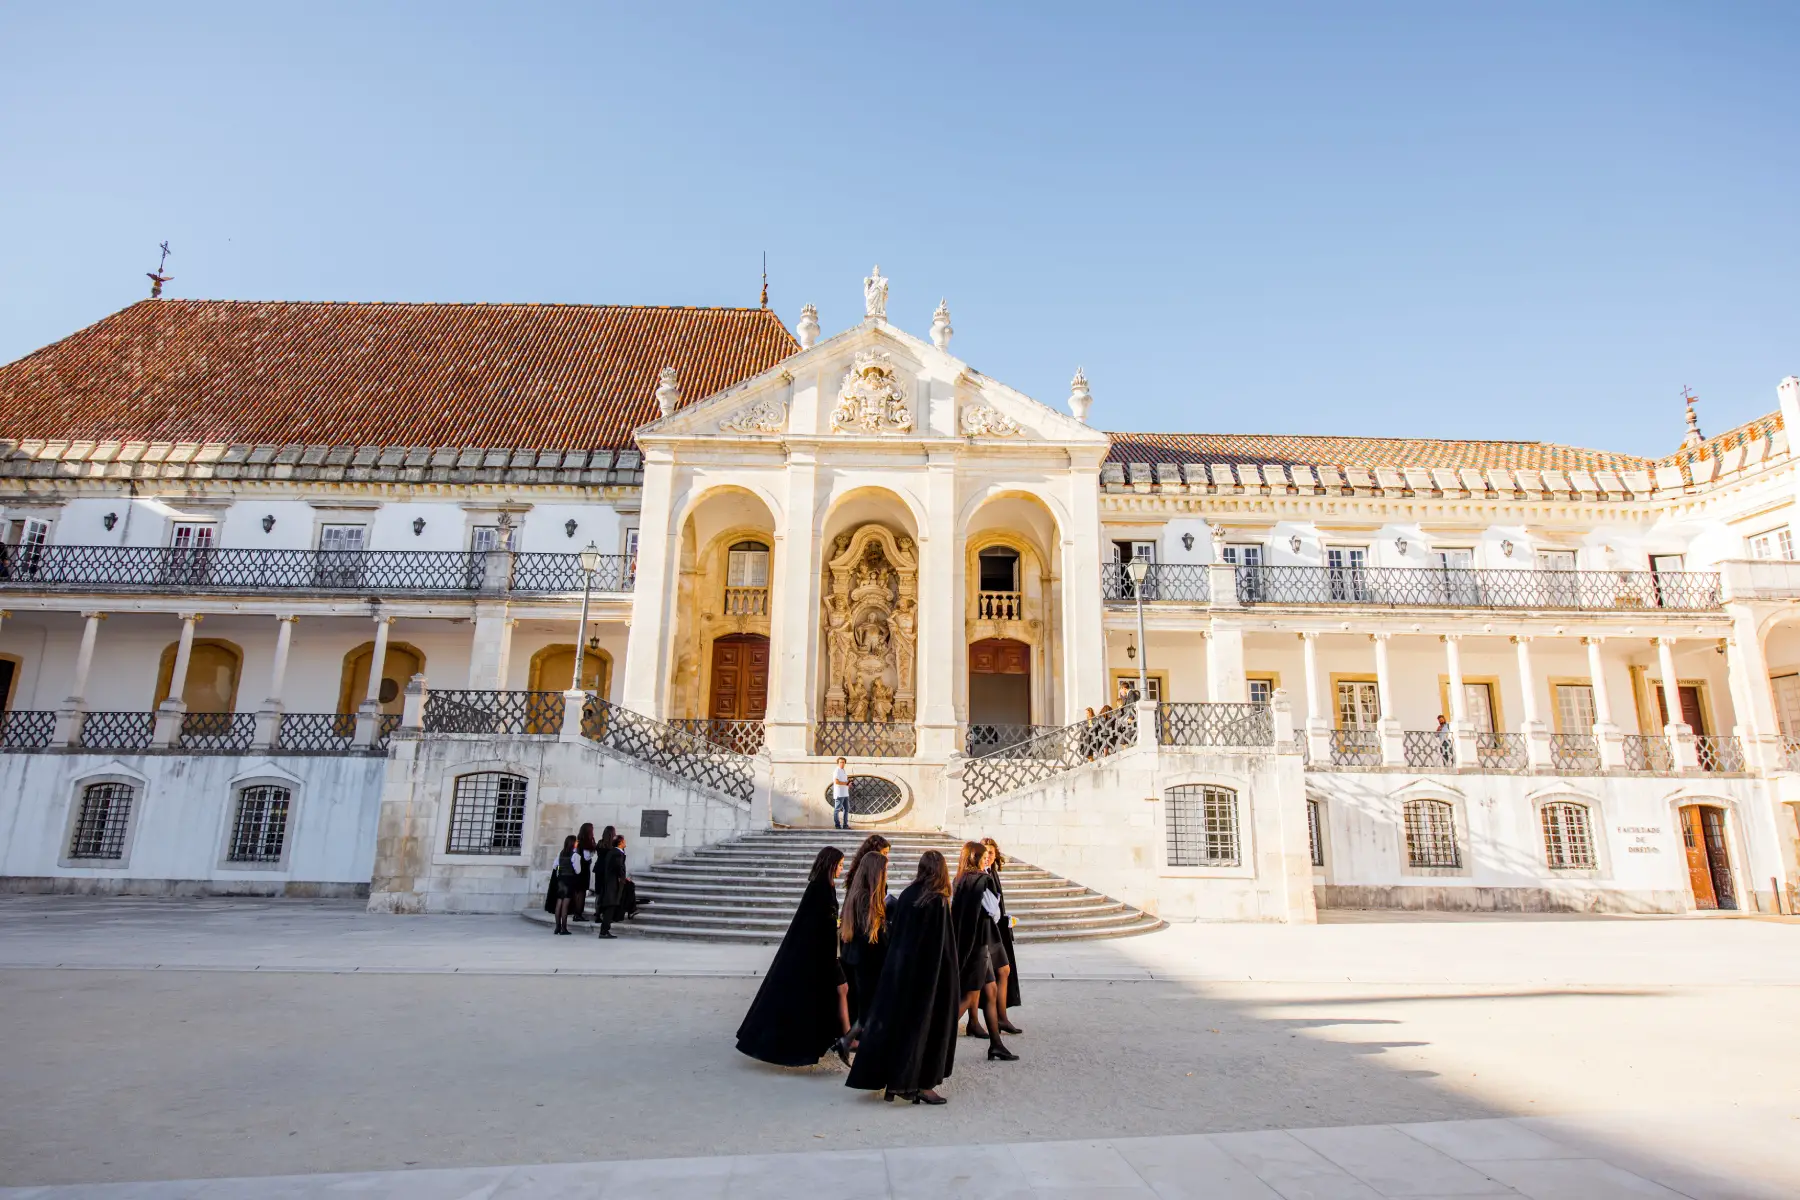 Students walk through Coimbra University wearing traditional gowns